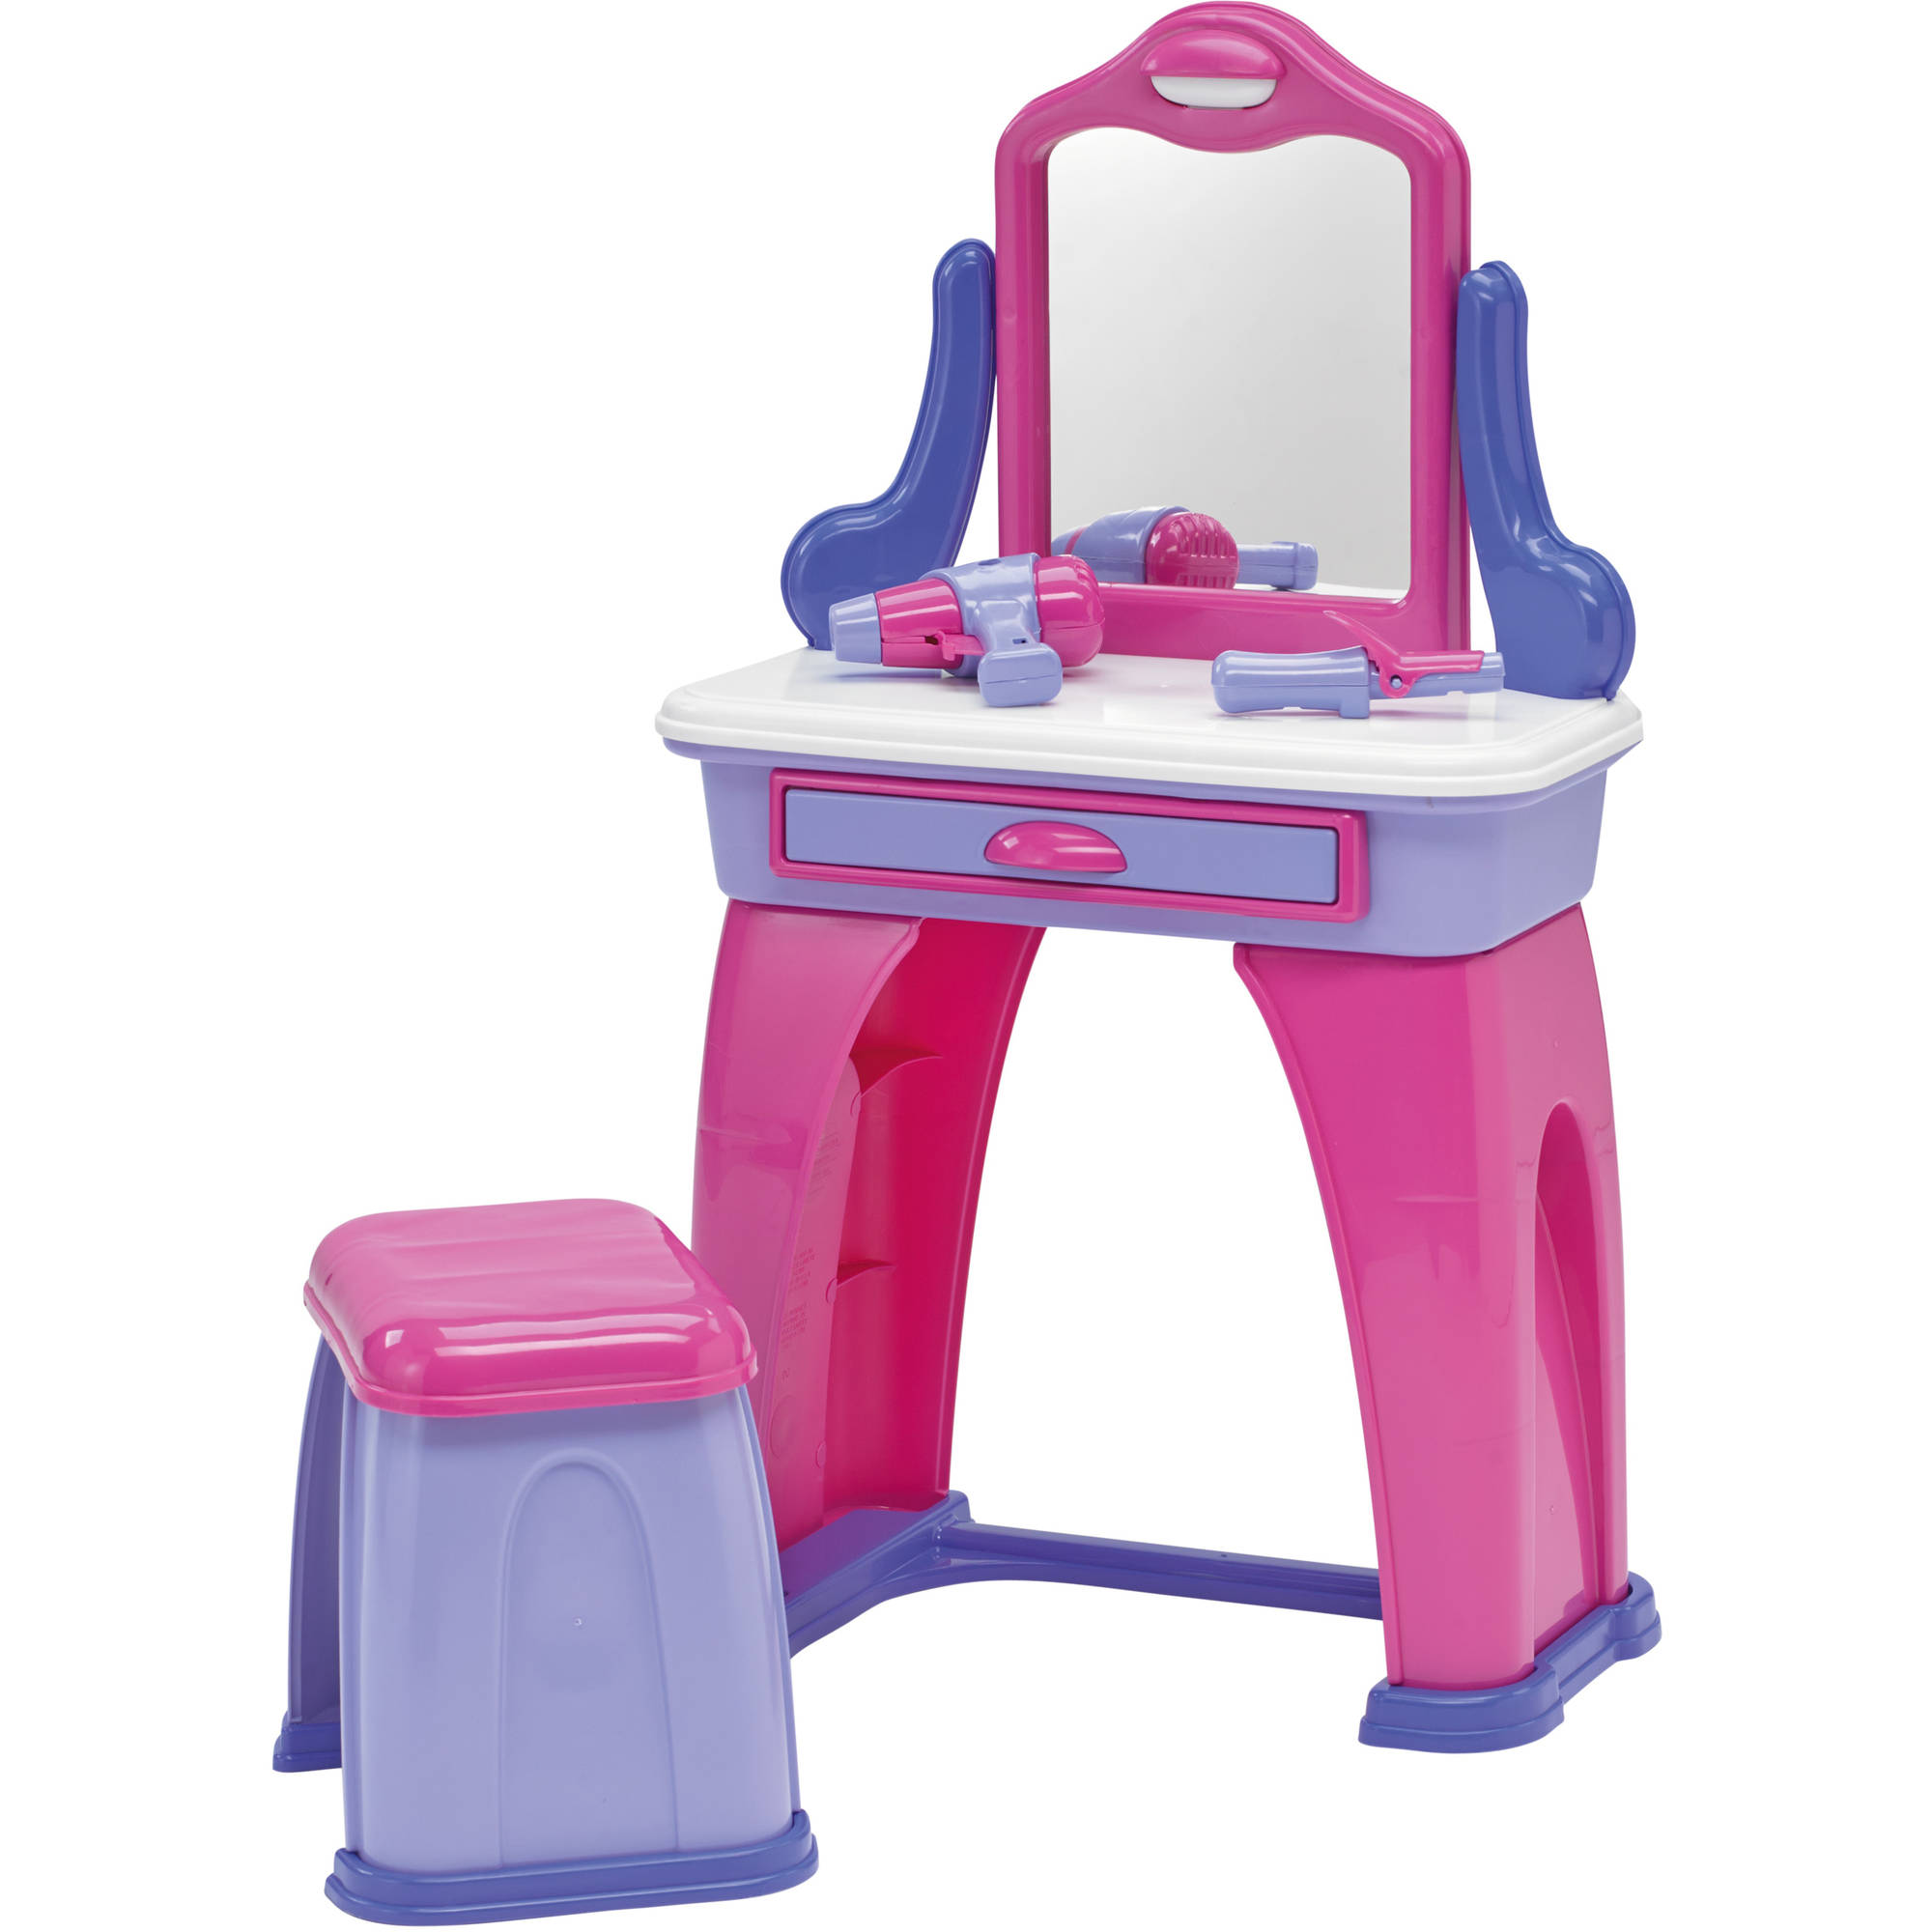 American Plastic Toys My Very Own Kids Vanity with 7 Accessories - image 1 of 3